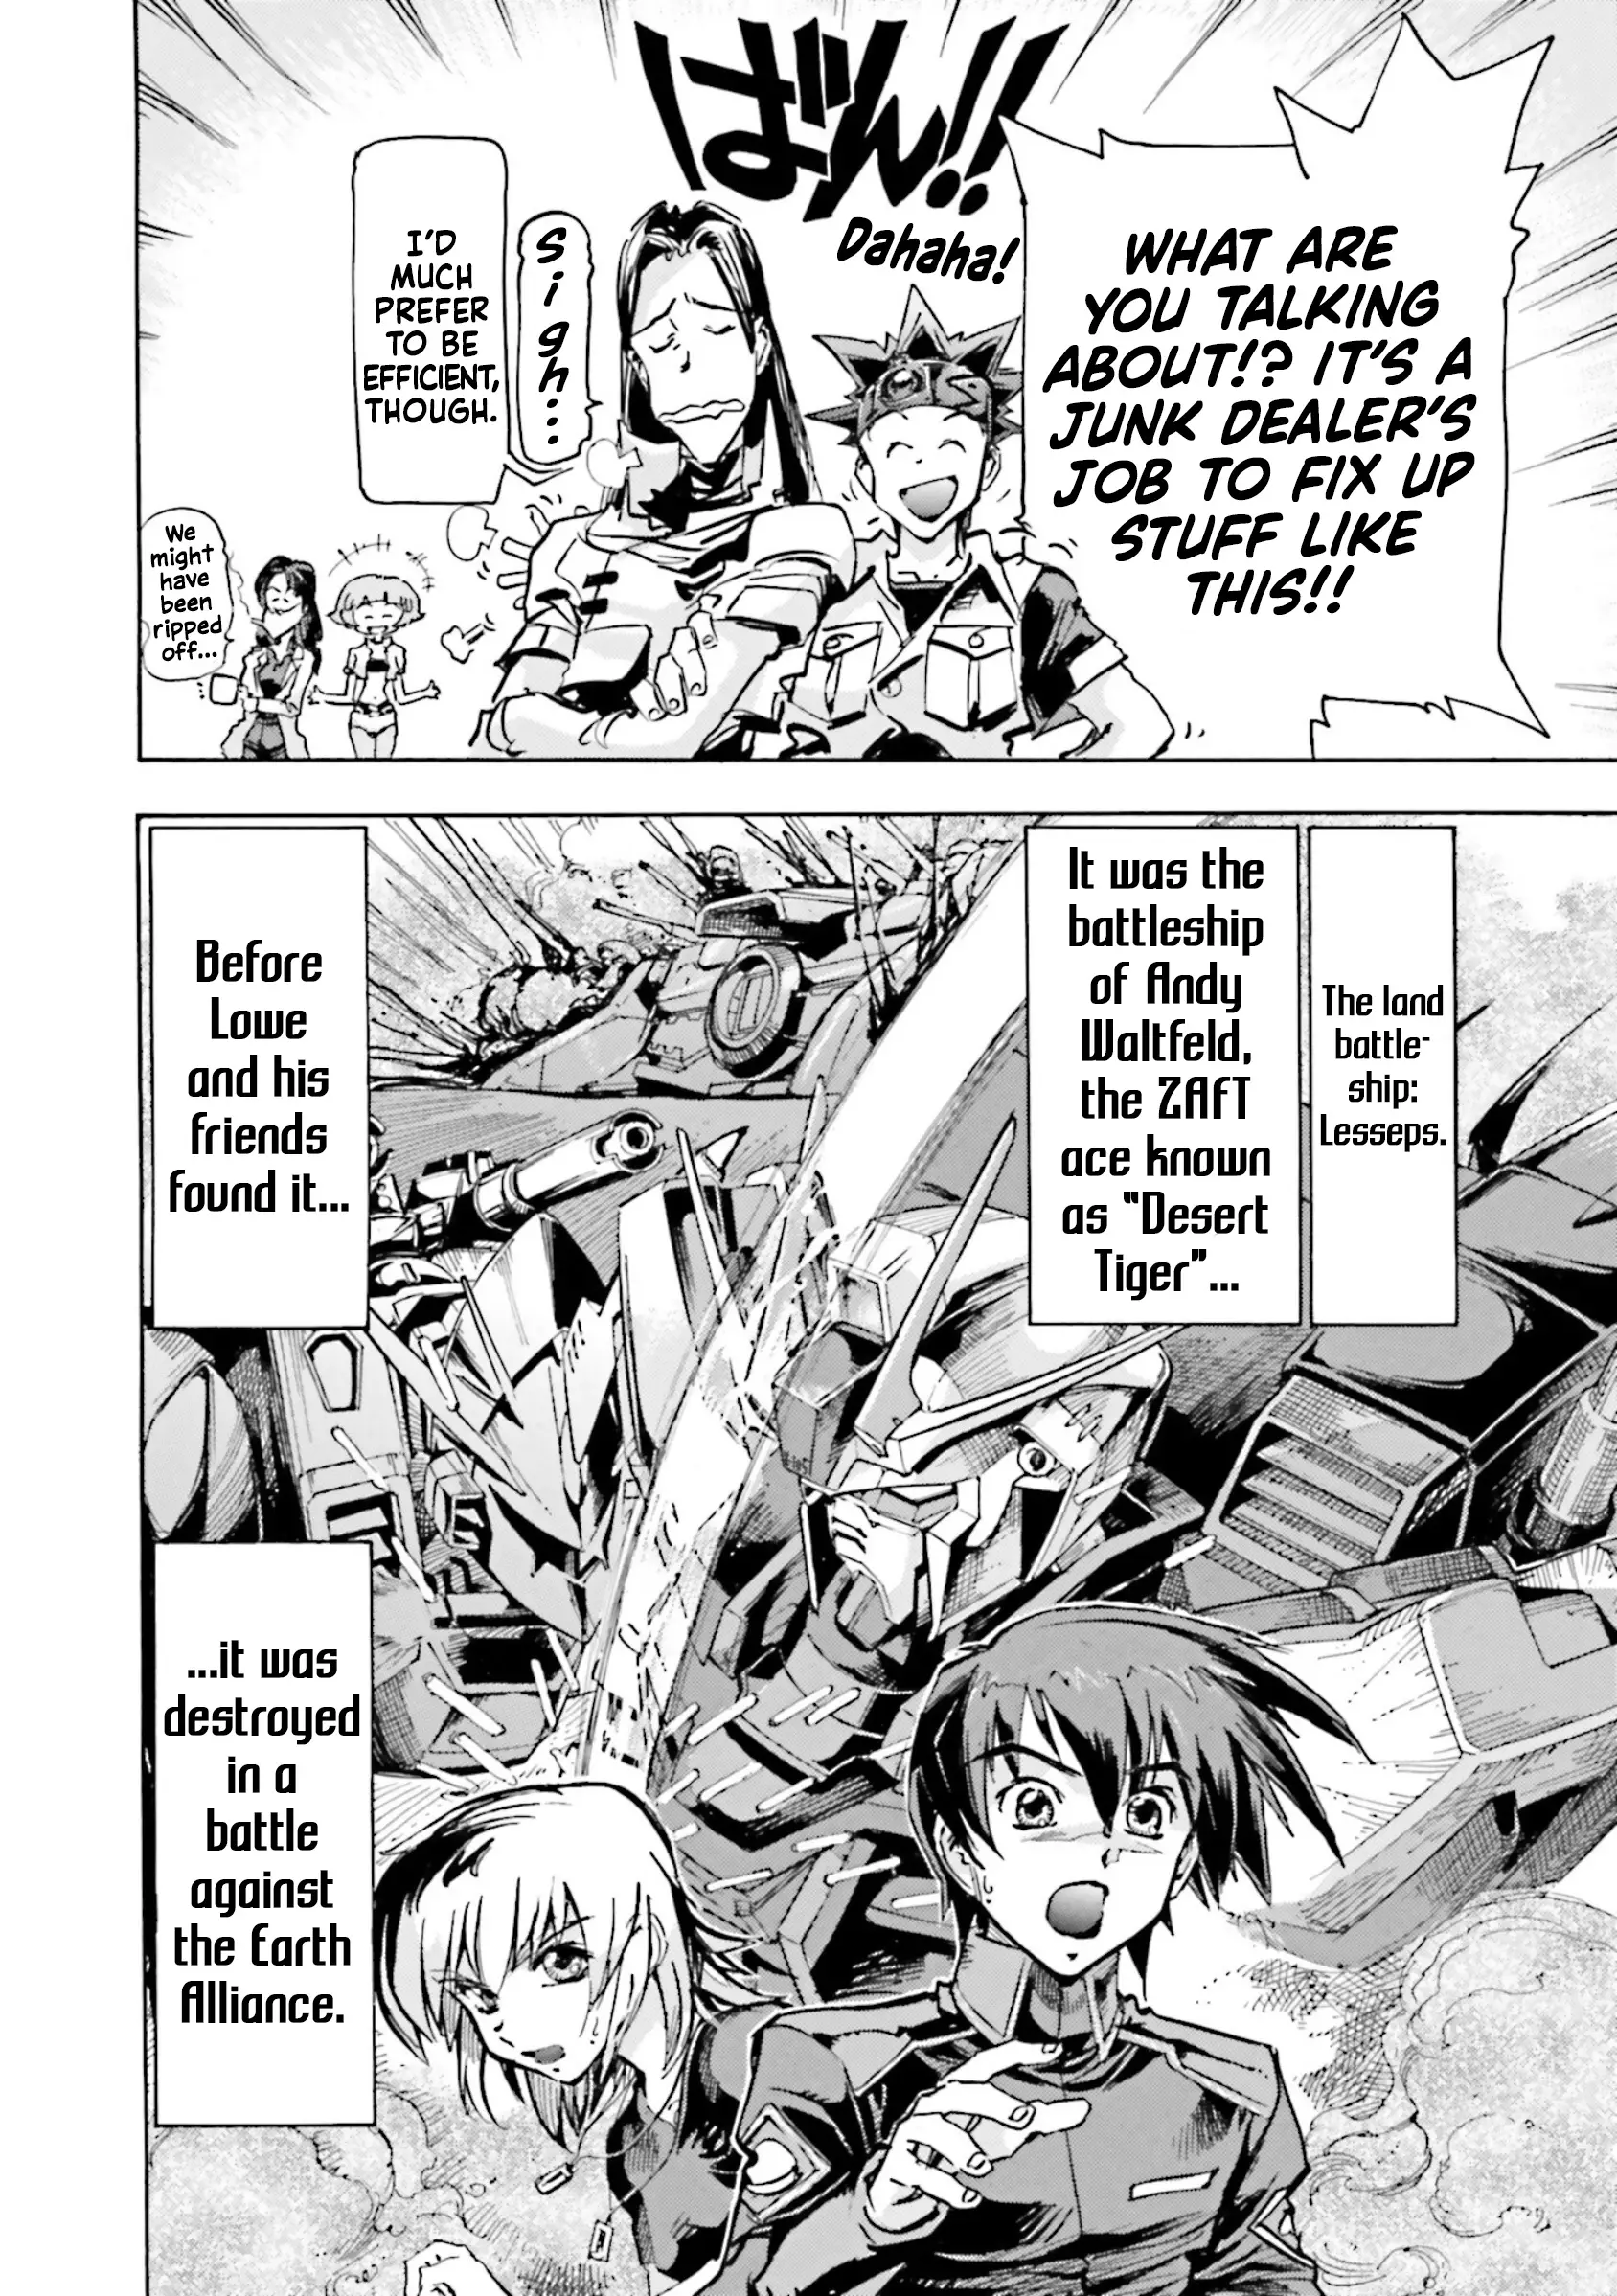 Mobile Suit Gundam Seed Astray R - 8 page 3-1e0faf10